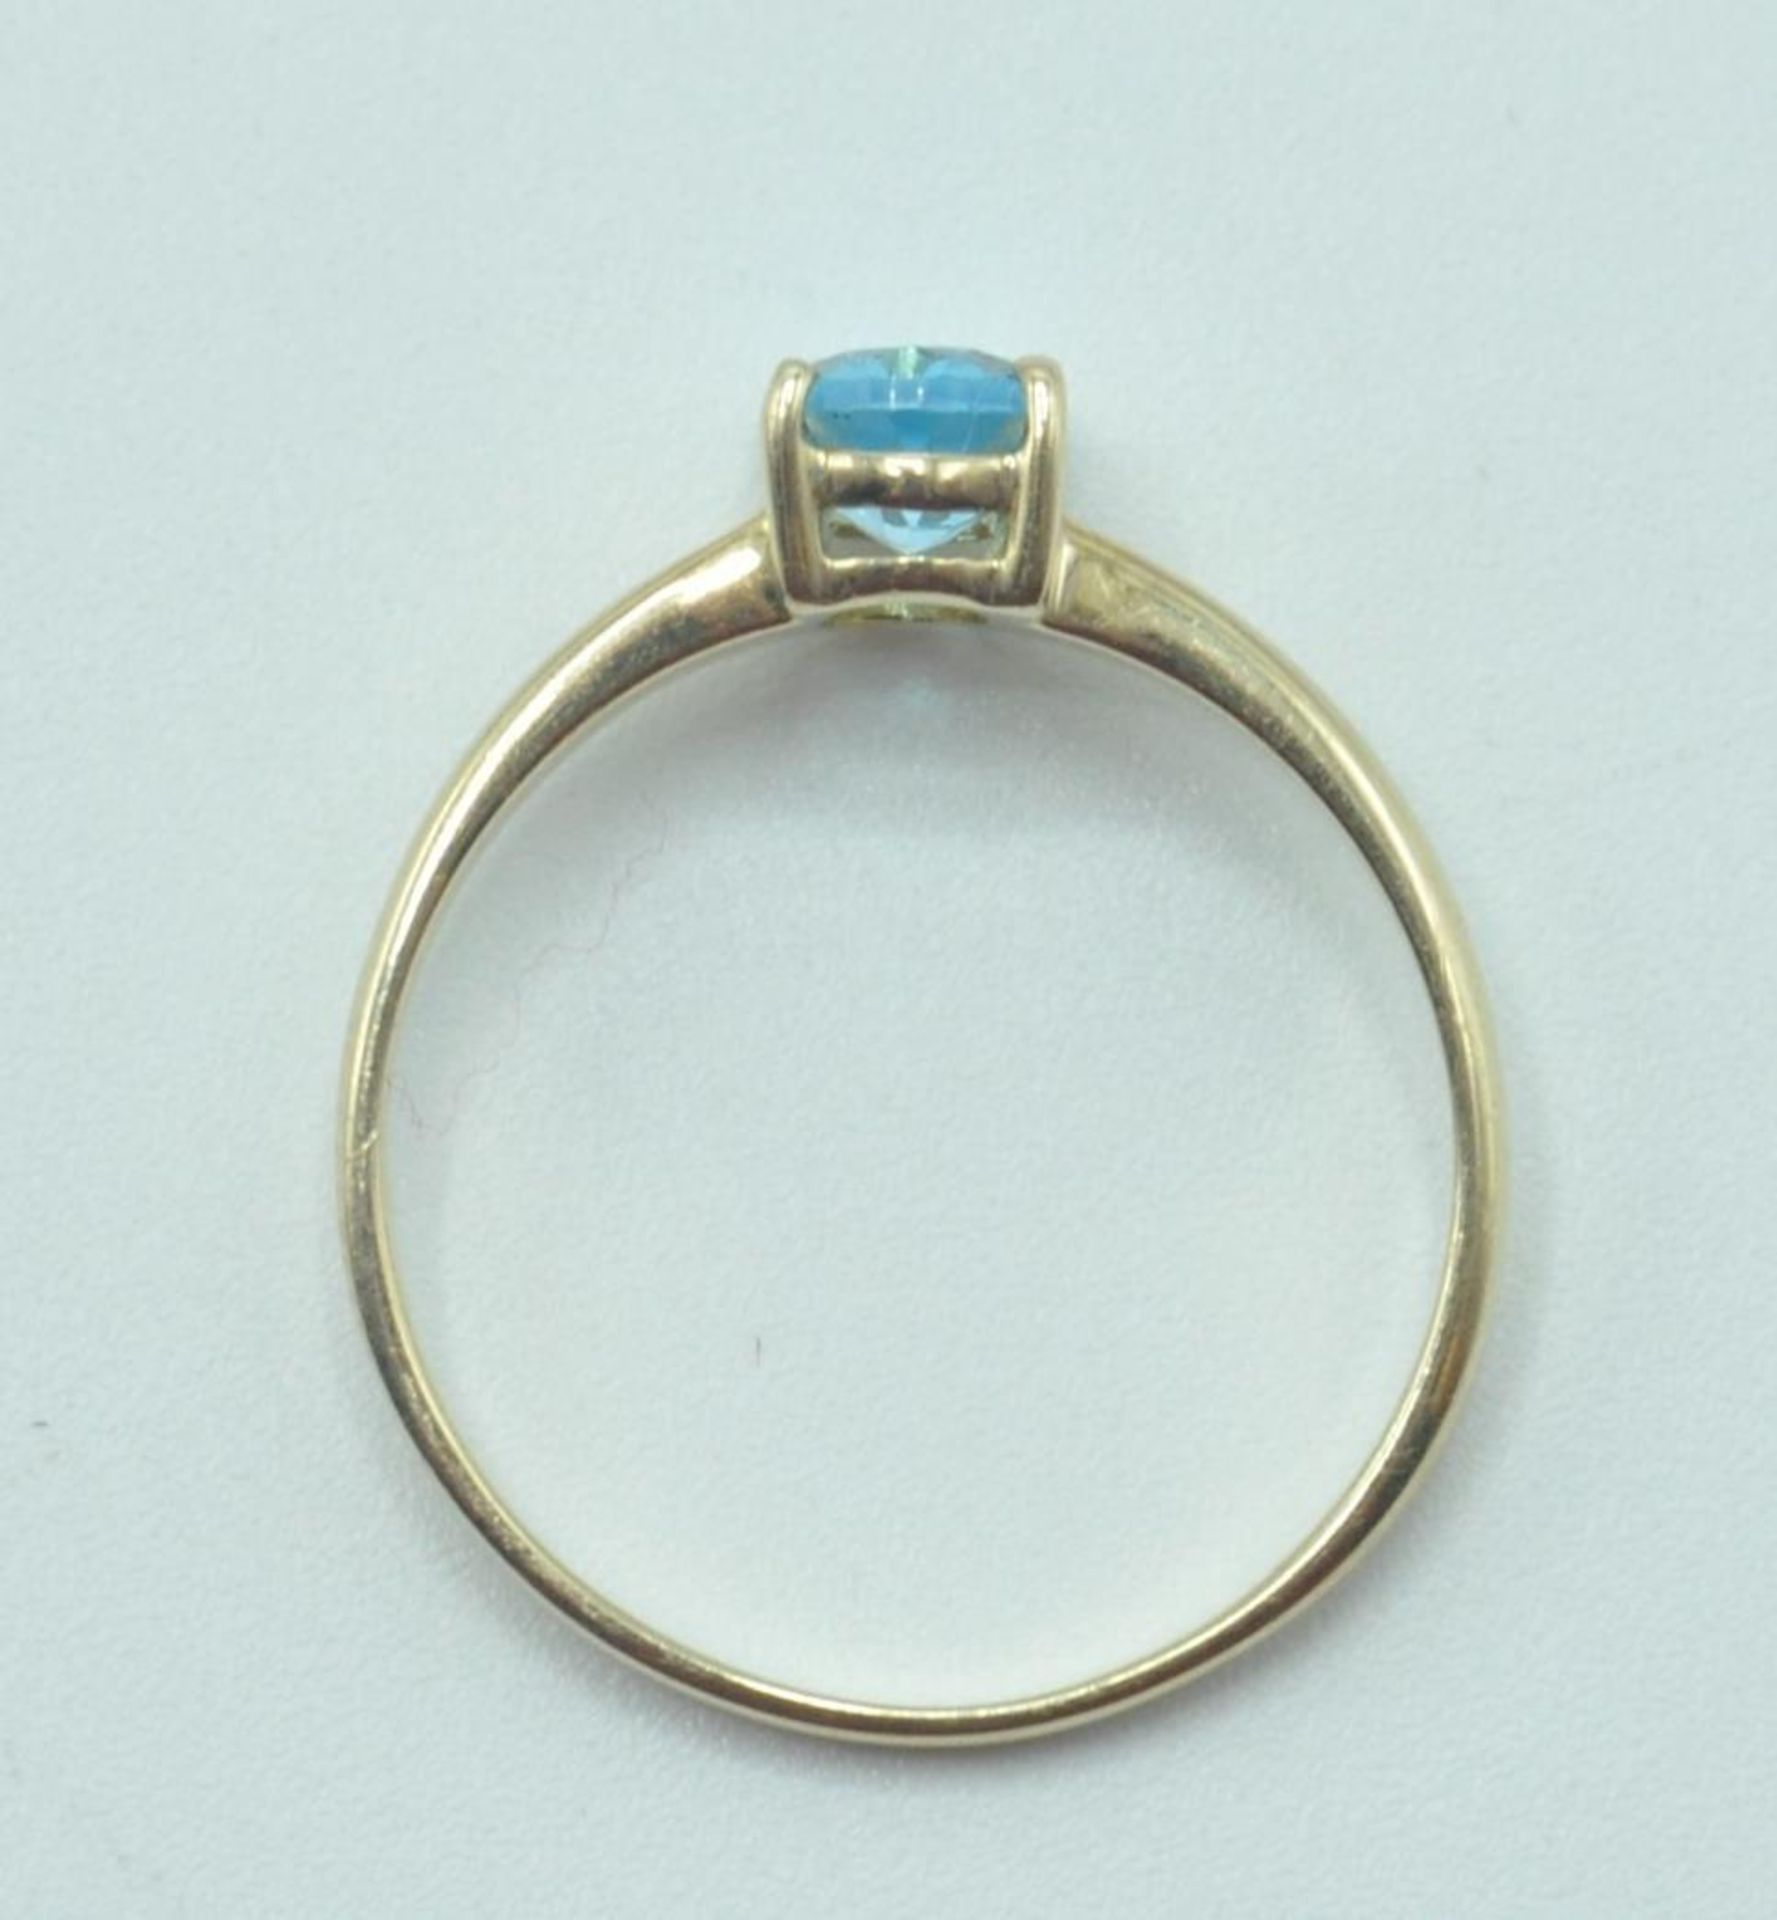 9CT GOLD AND BLUE STONE SOLITAIRE RING - Image 5 of 6